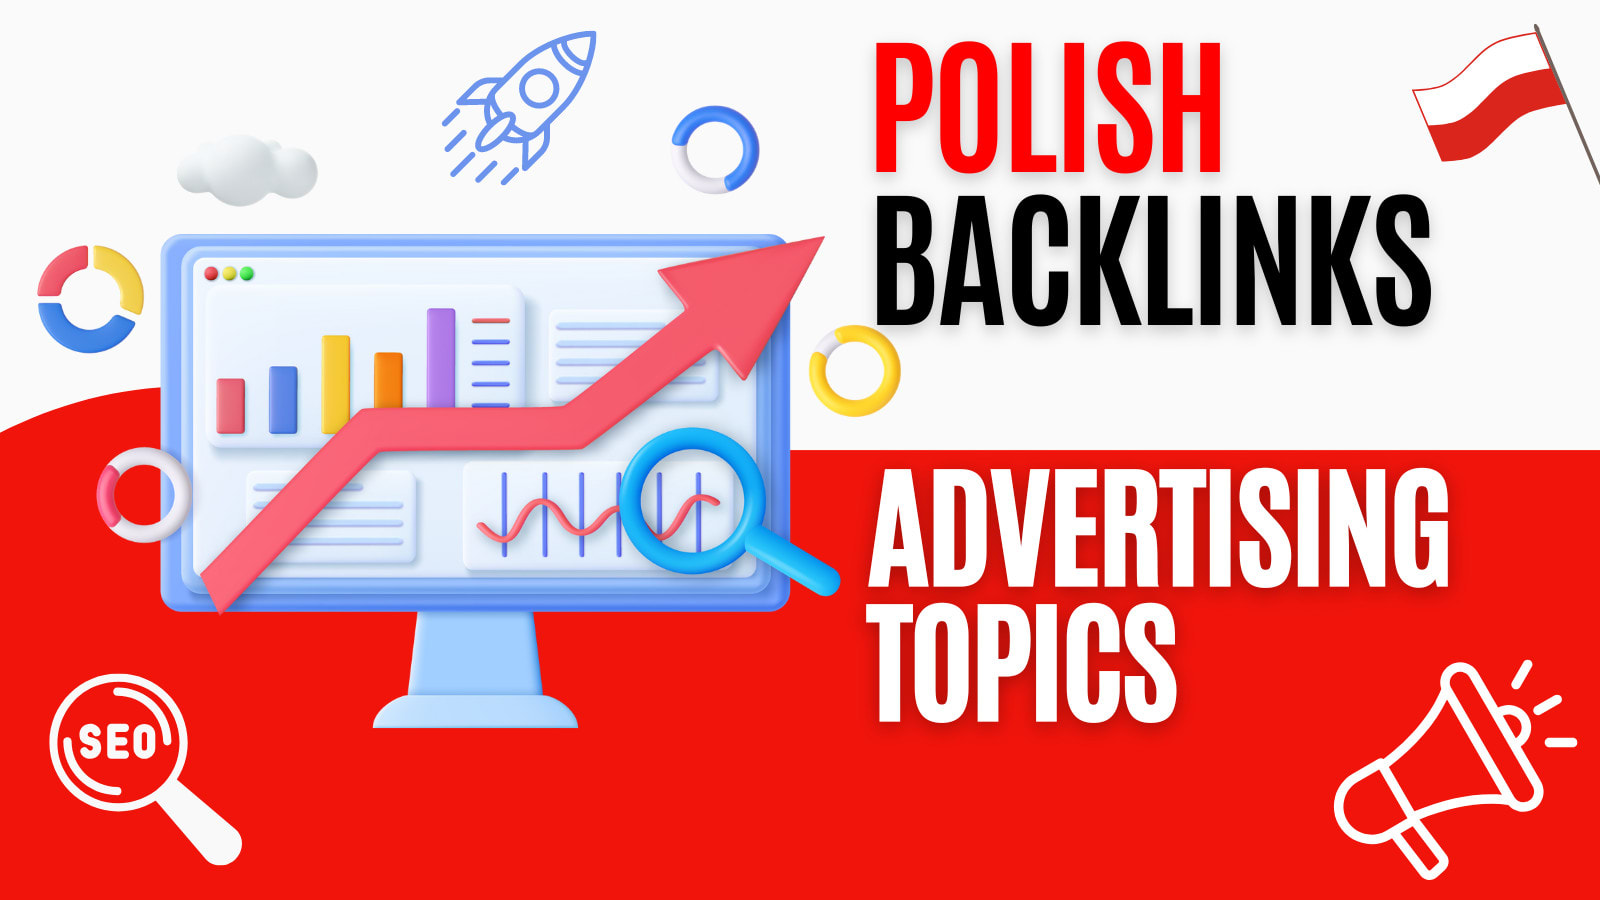 I will write 25-75 advertising topics on polish discussion forums